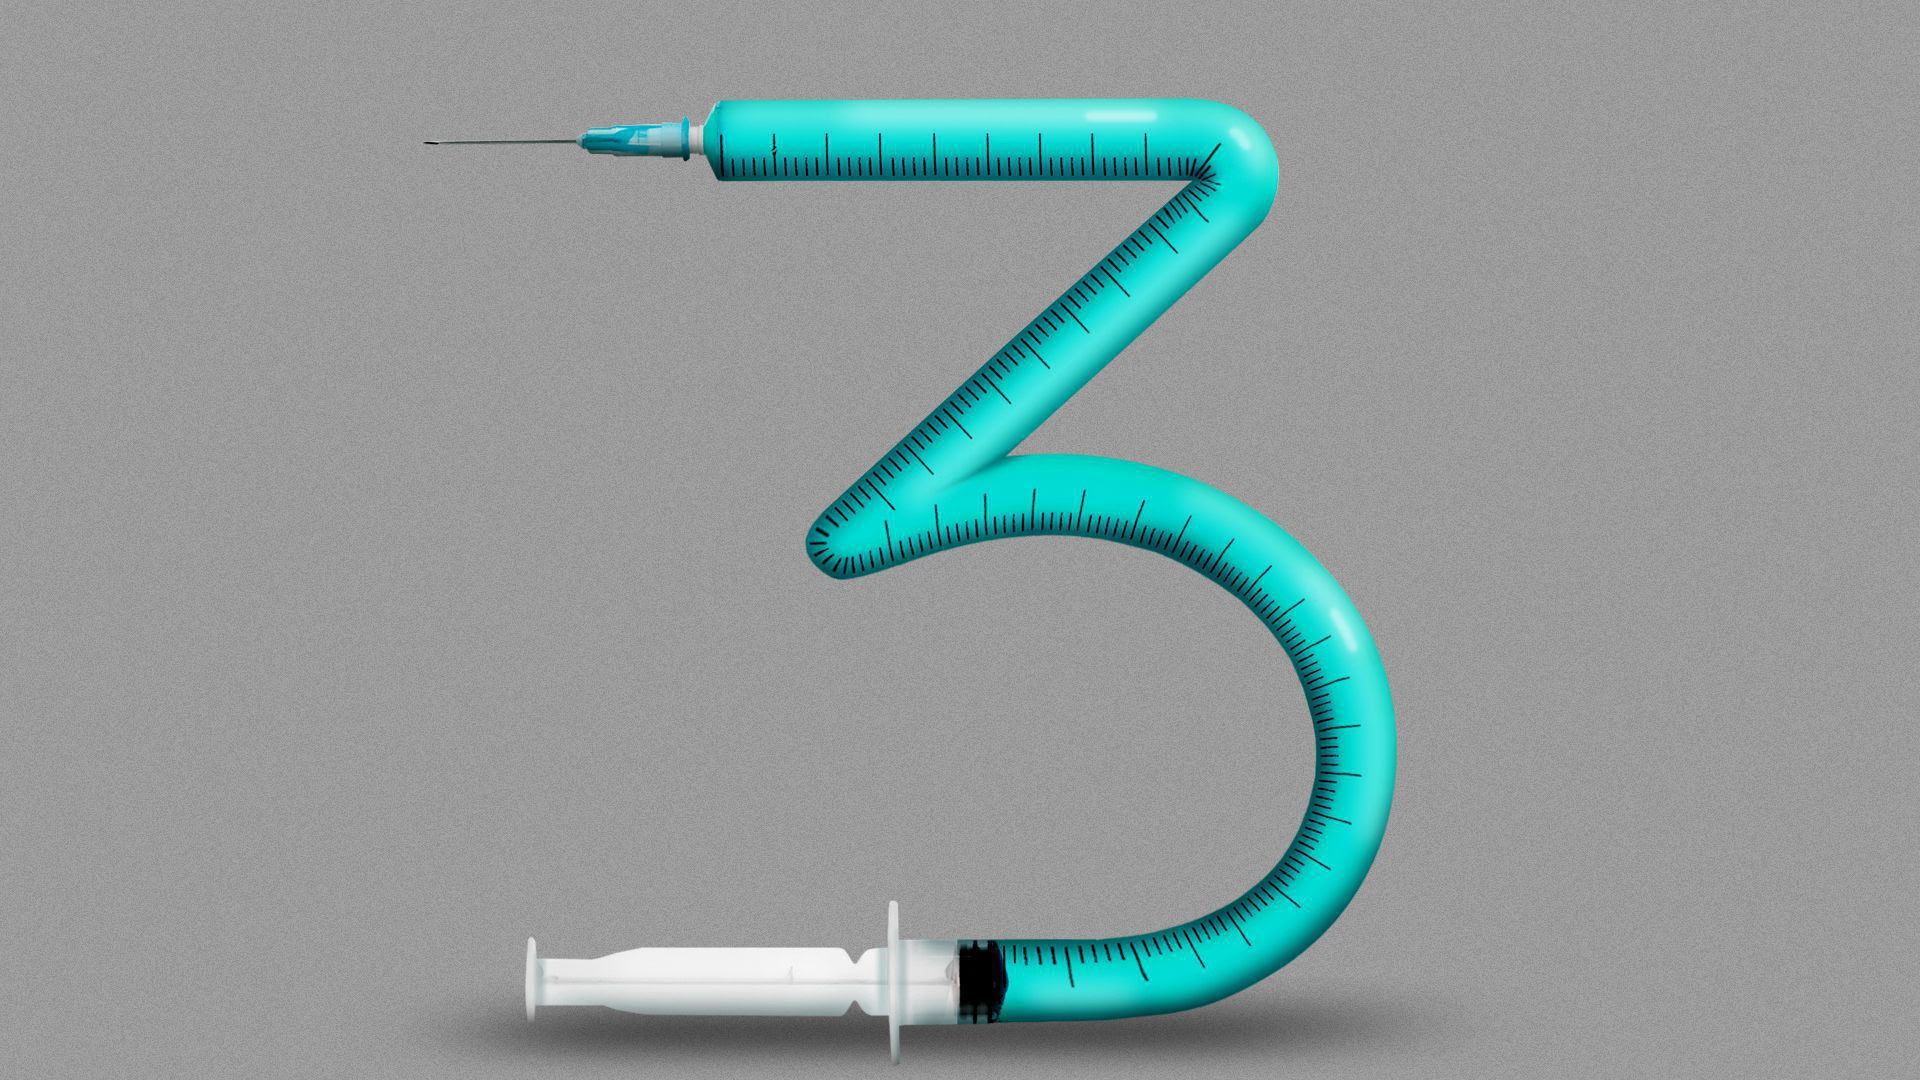 A vaccine needle in the shape of a 3